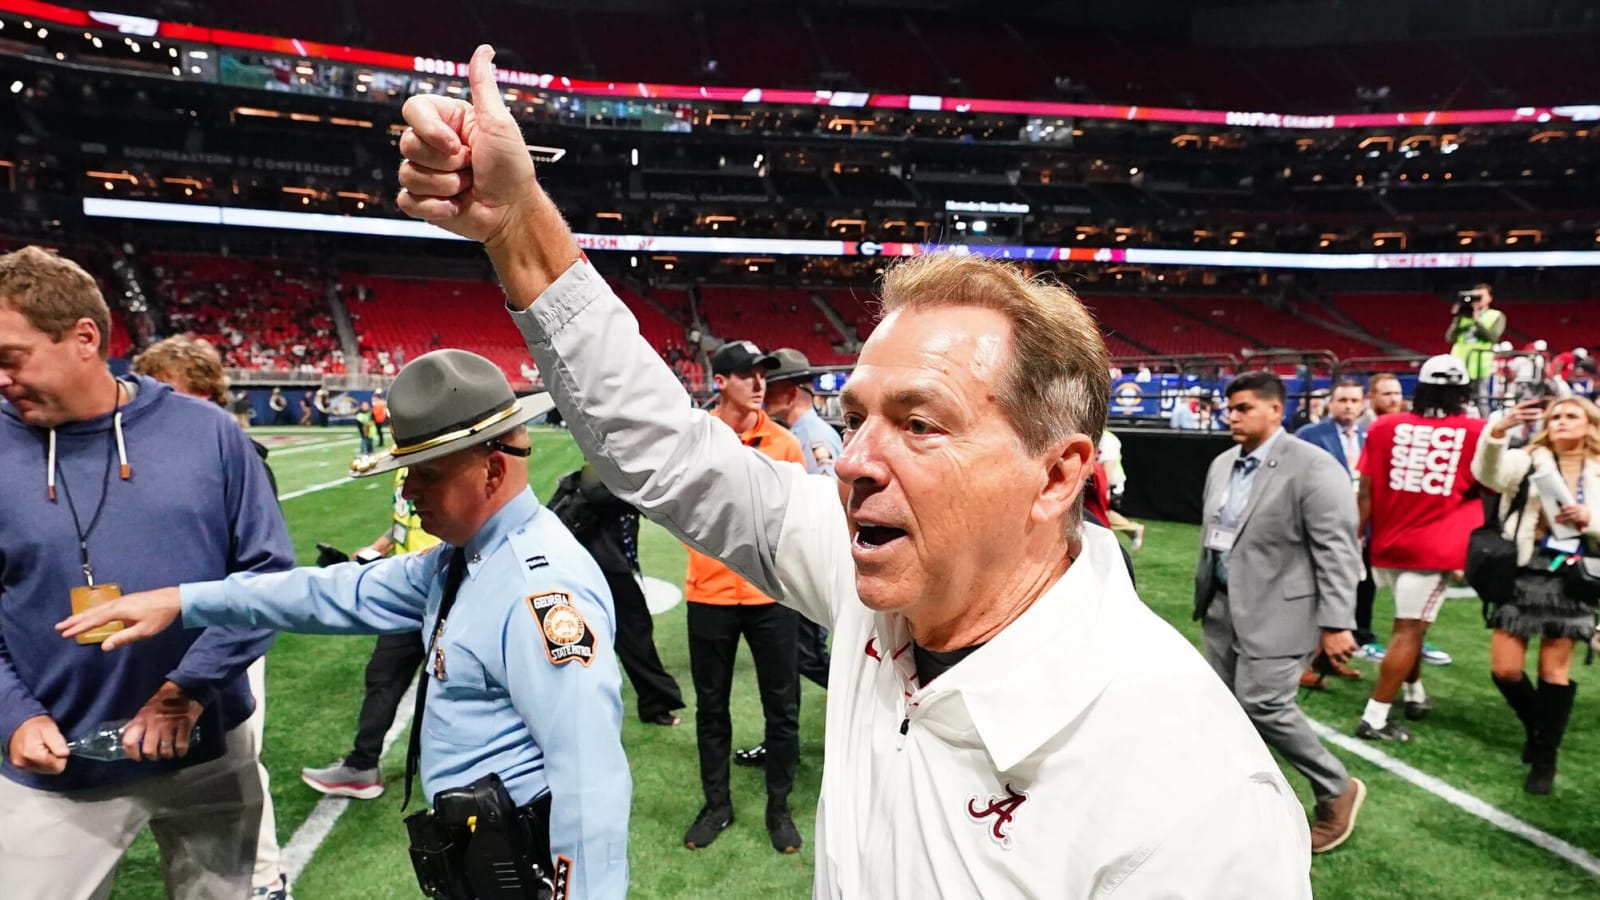 Nick Saban has message for CFP selection committee